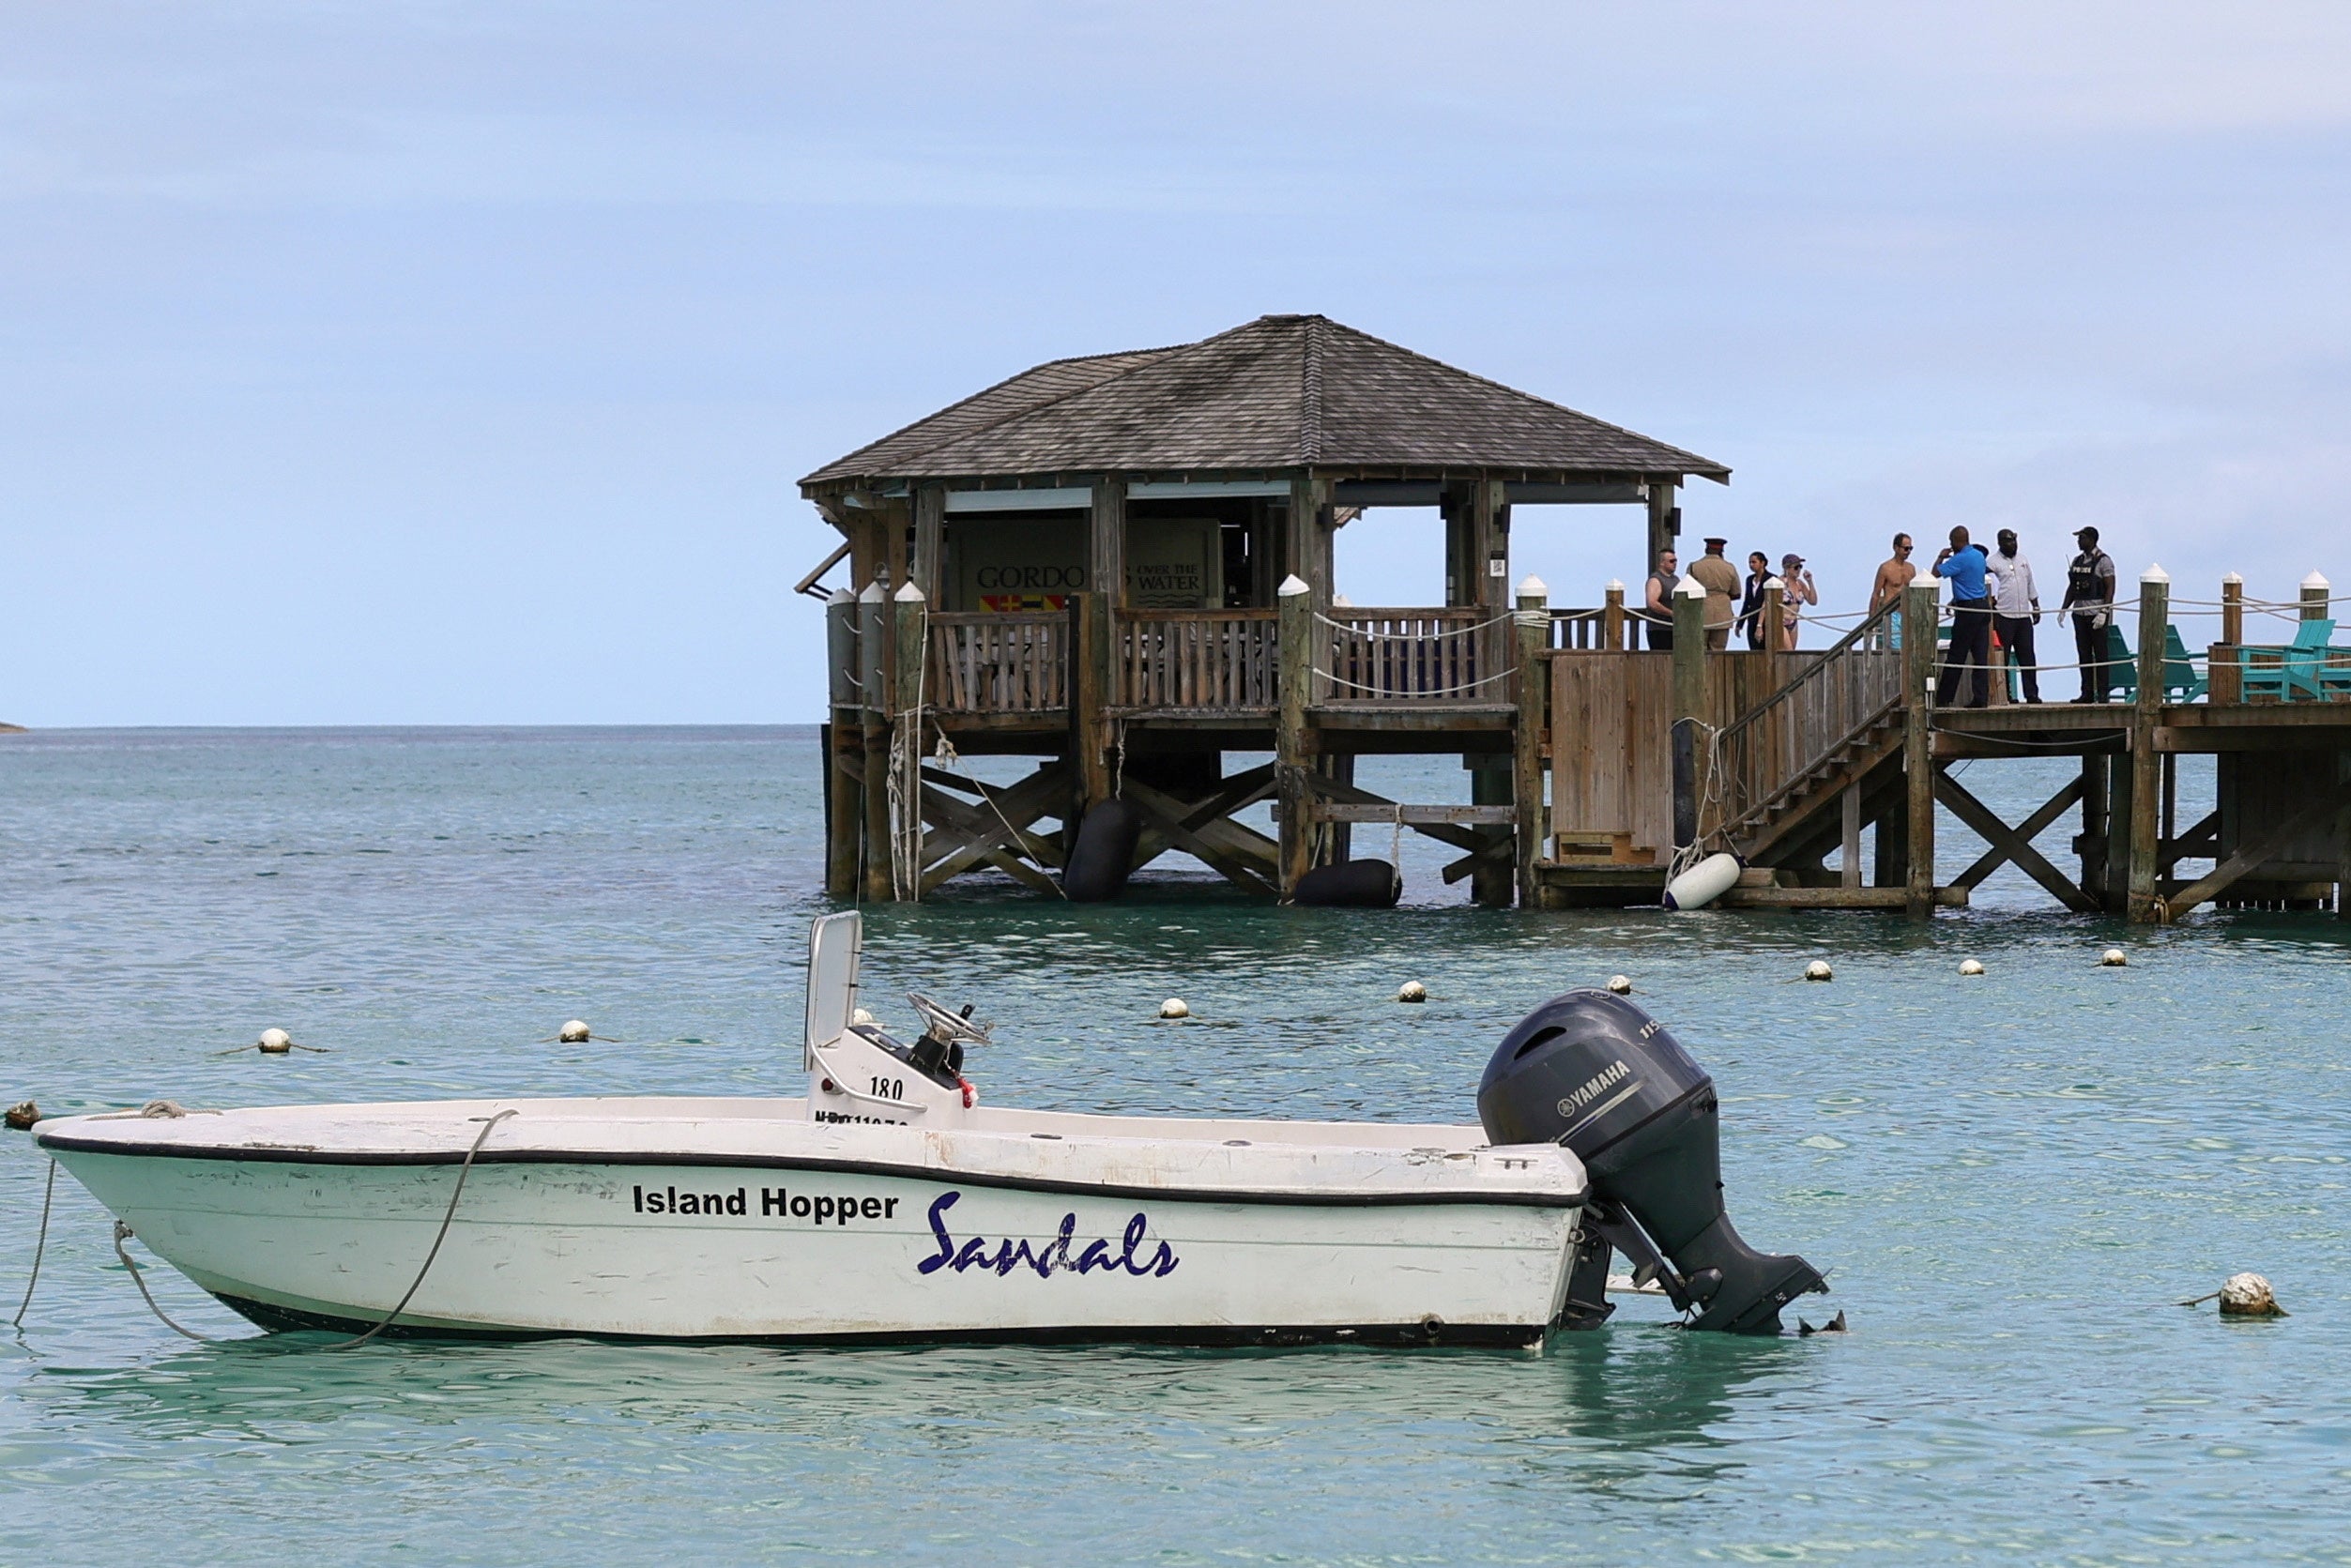 People gather on the resort pier after the shark attack at Sandals Royal Bahamian resort